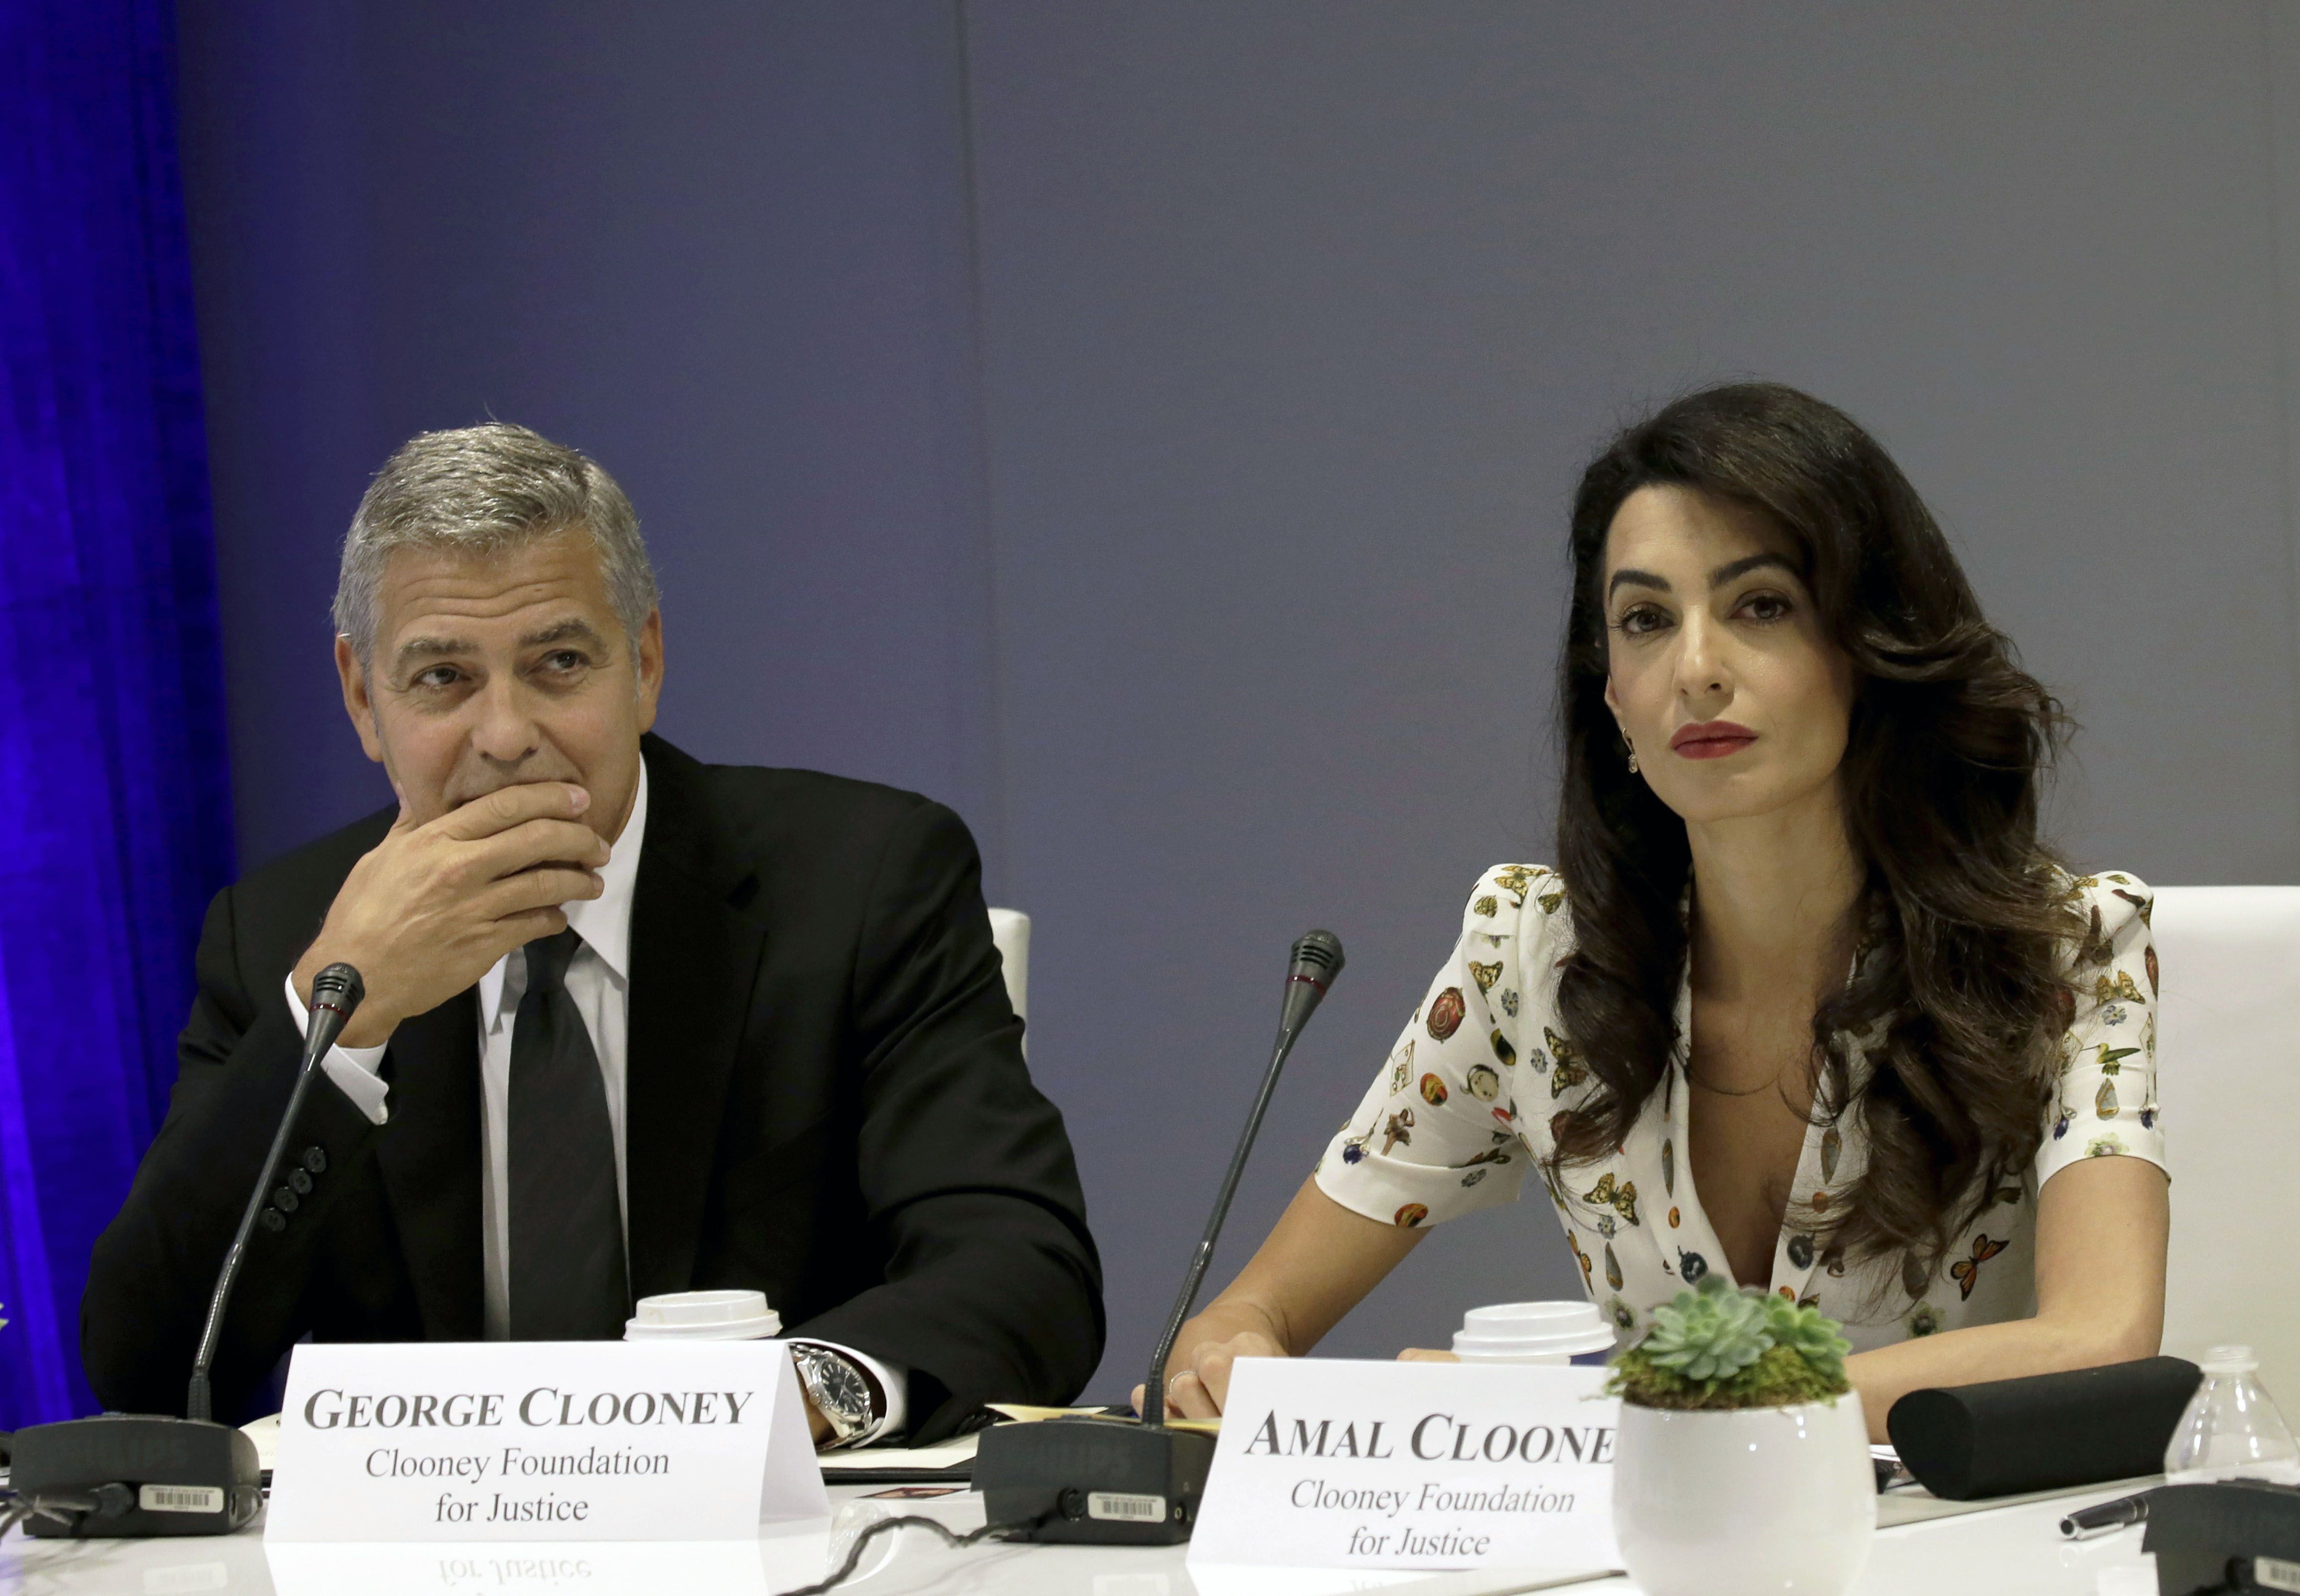 Amal Clooney Discussed the "Assault on Journalists" in a UN Speech